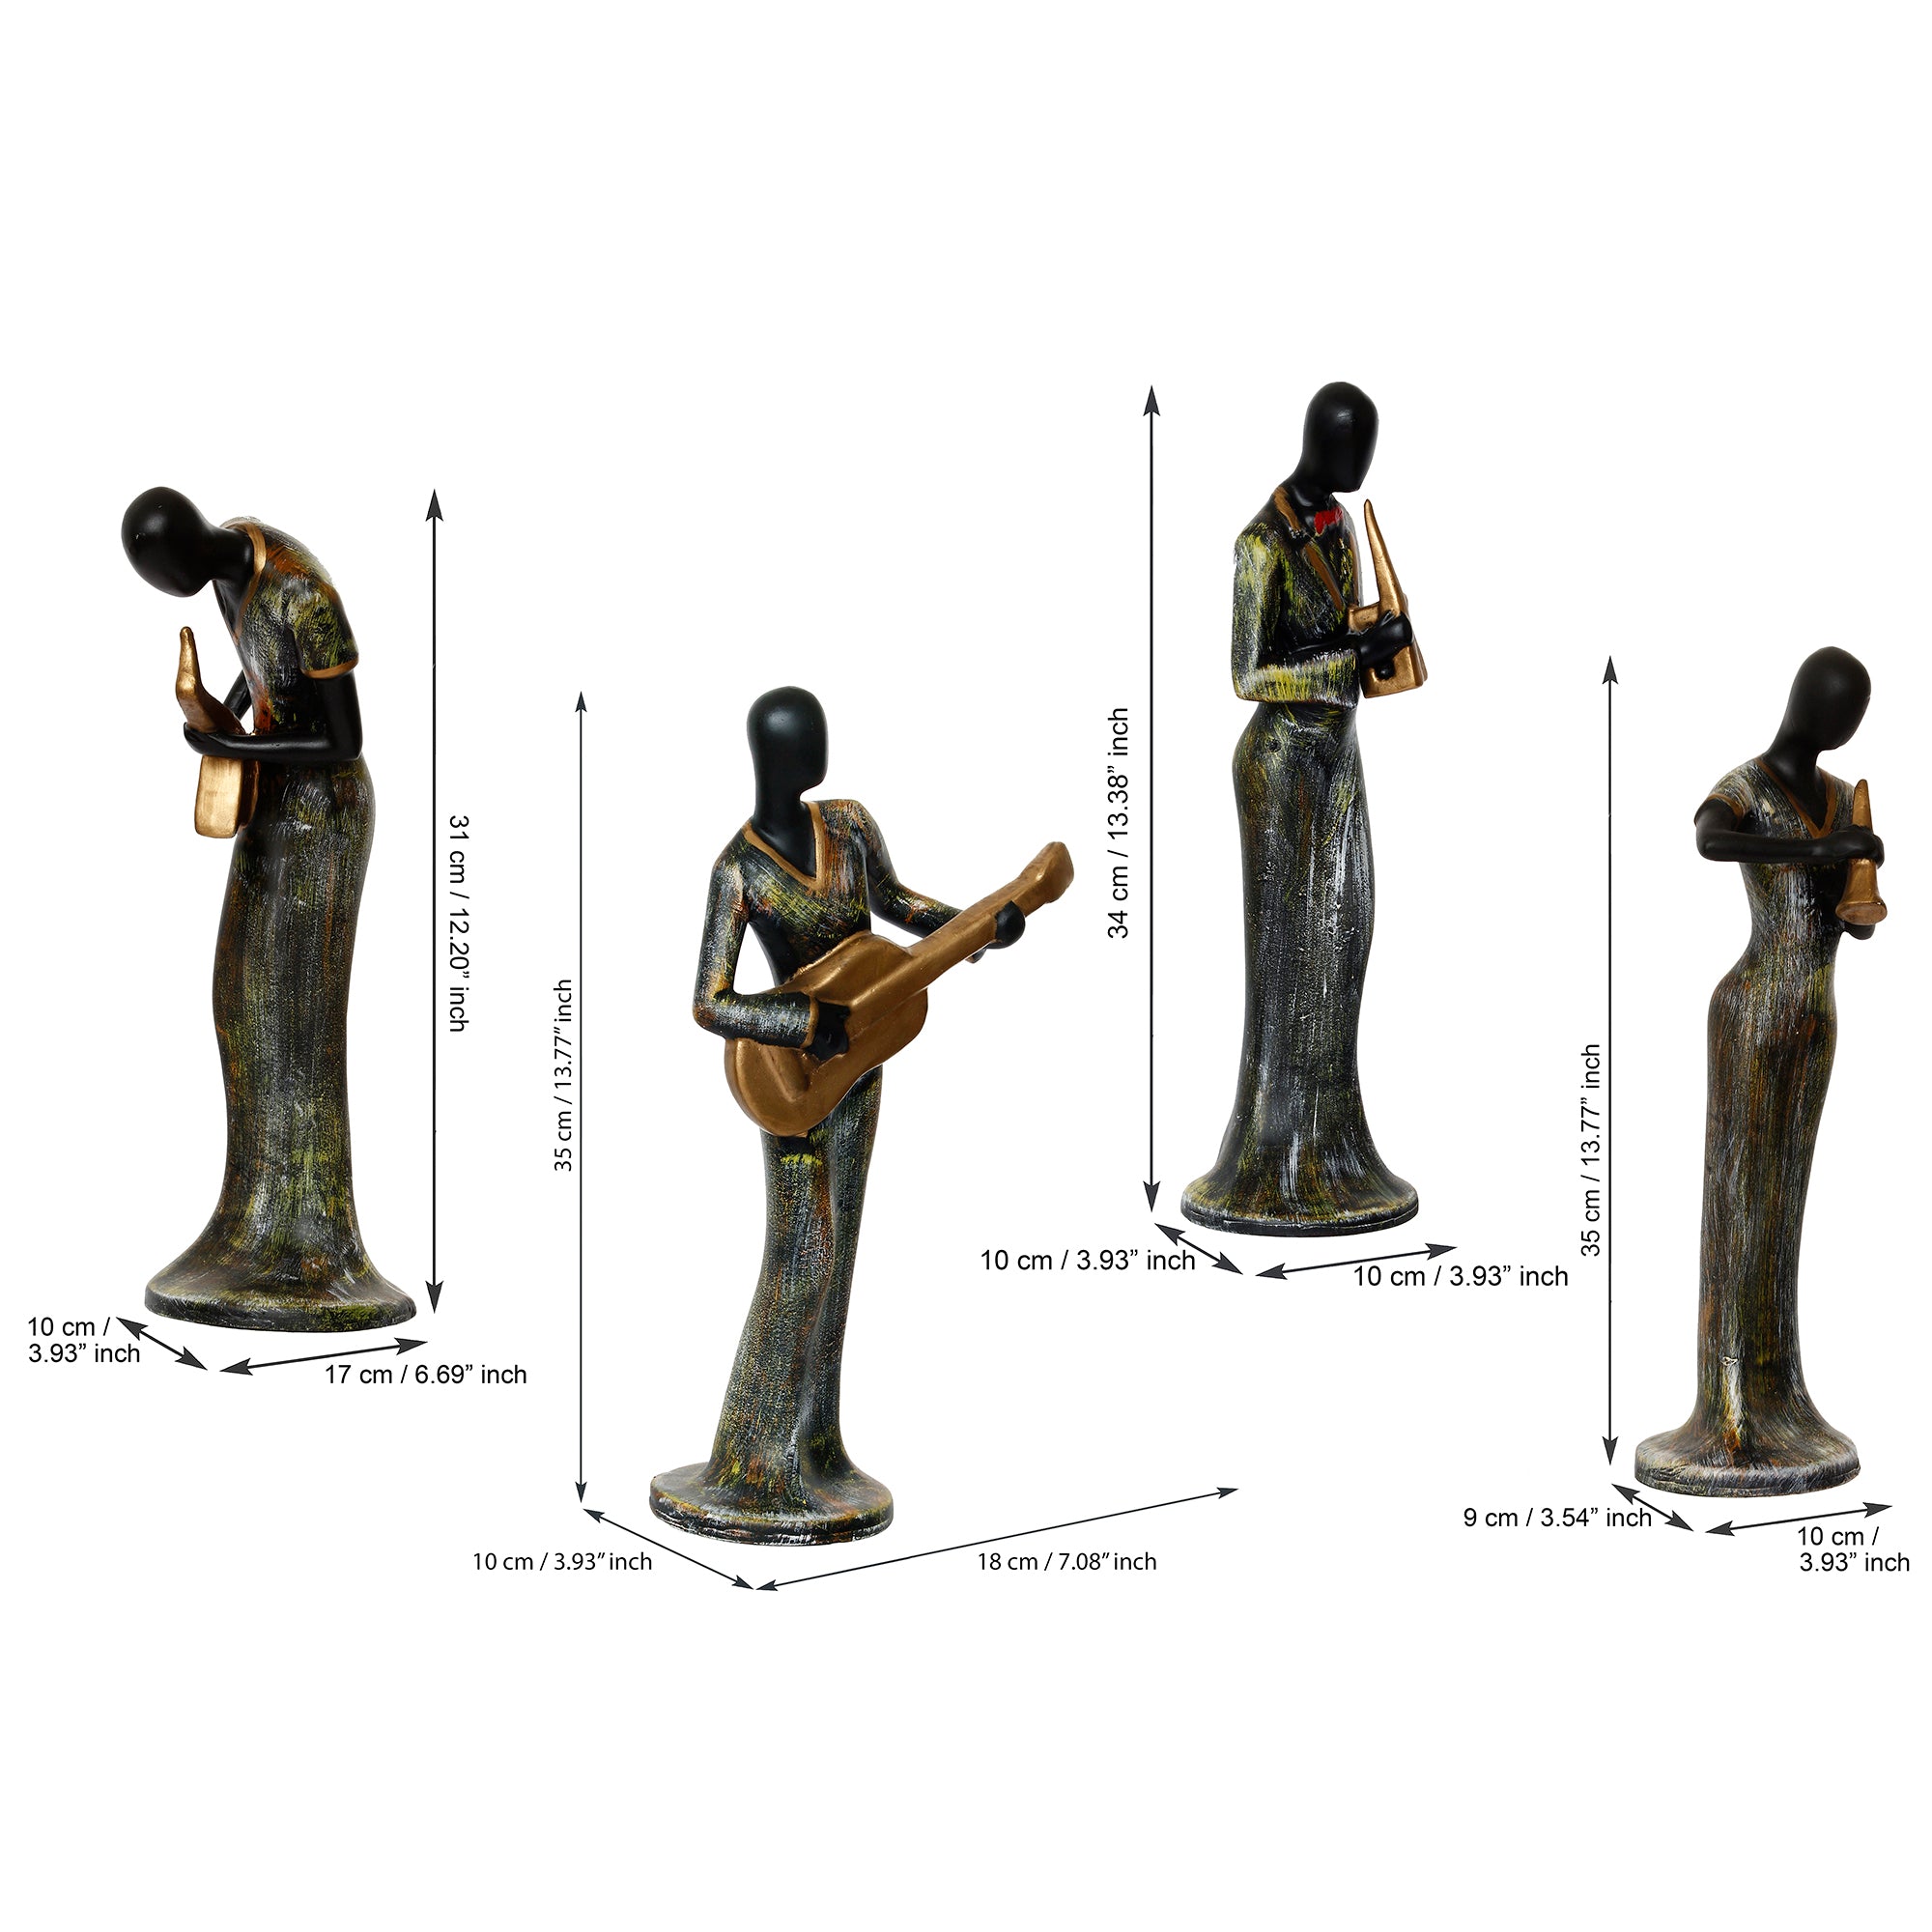 Grey and Black Polyresin Set of 4 Ladies figurines Playing Clarinet, Guitar, Wind, Saxophone Musical Instrument Handcrafted Decorative Showpiece 3